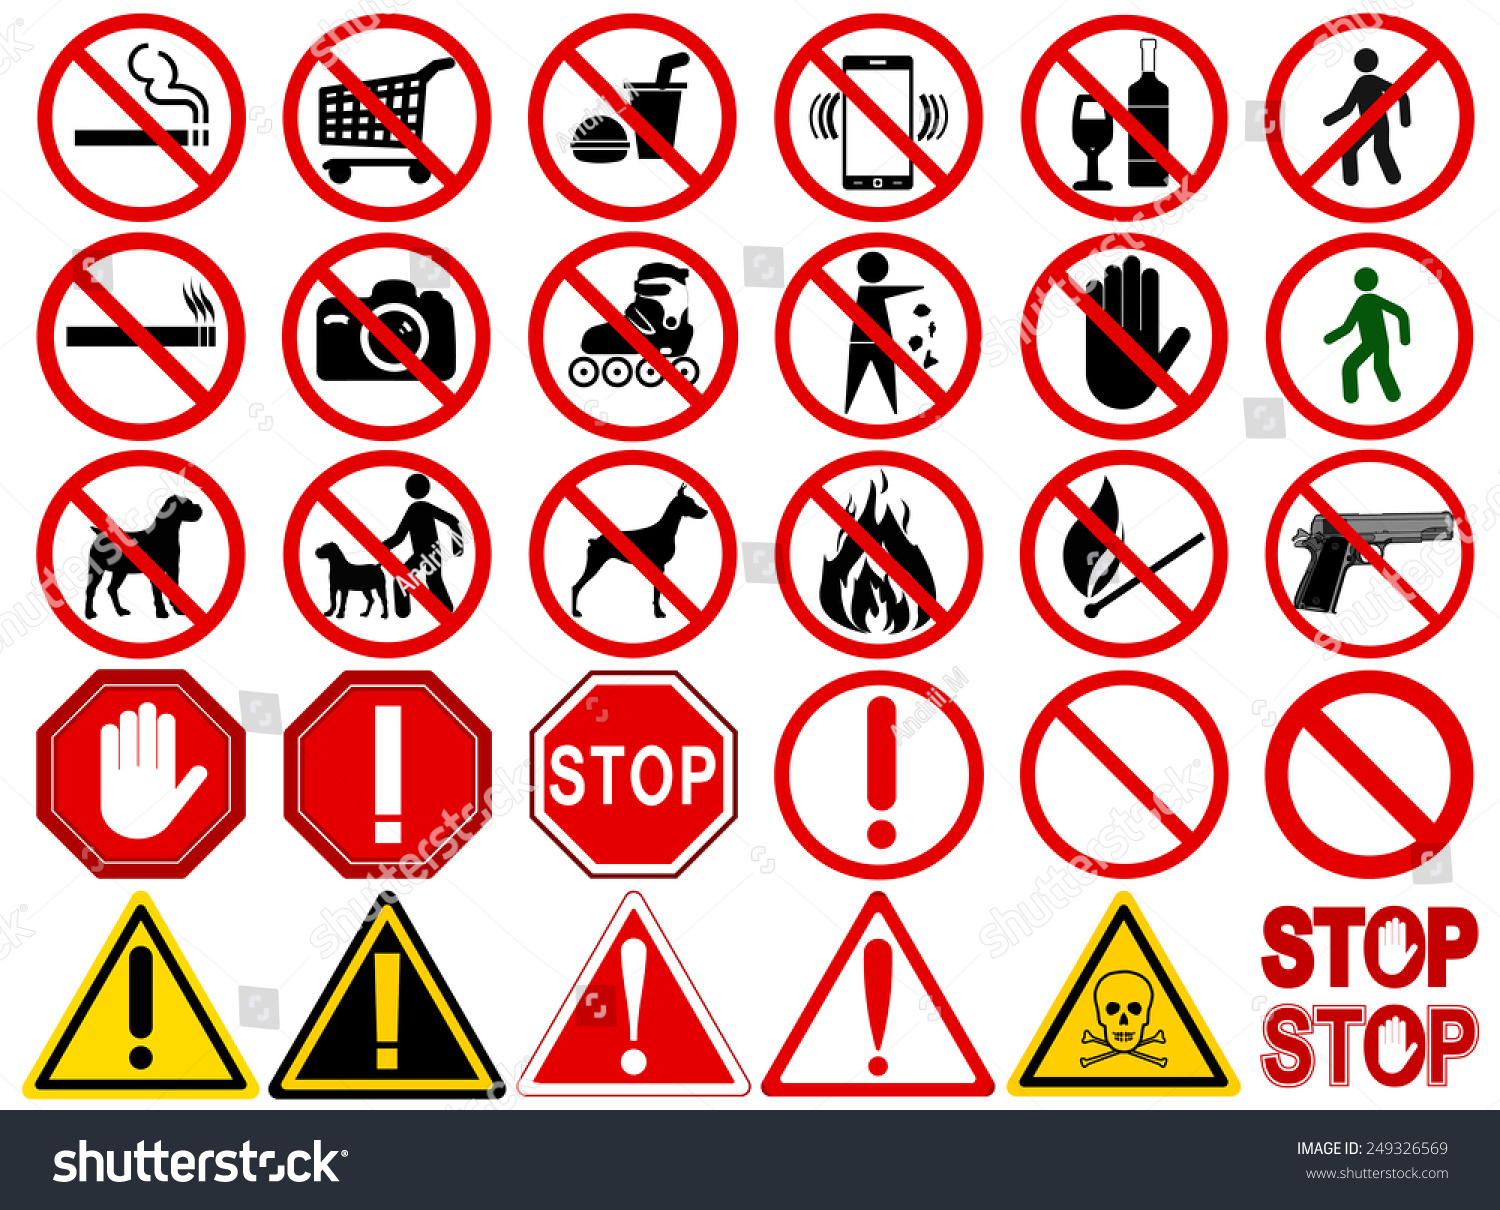 Set of Signs for Different Prohibited Activities. quot;Noquot; signs, No 